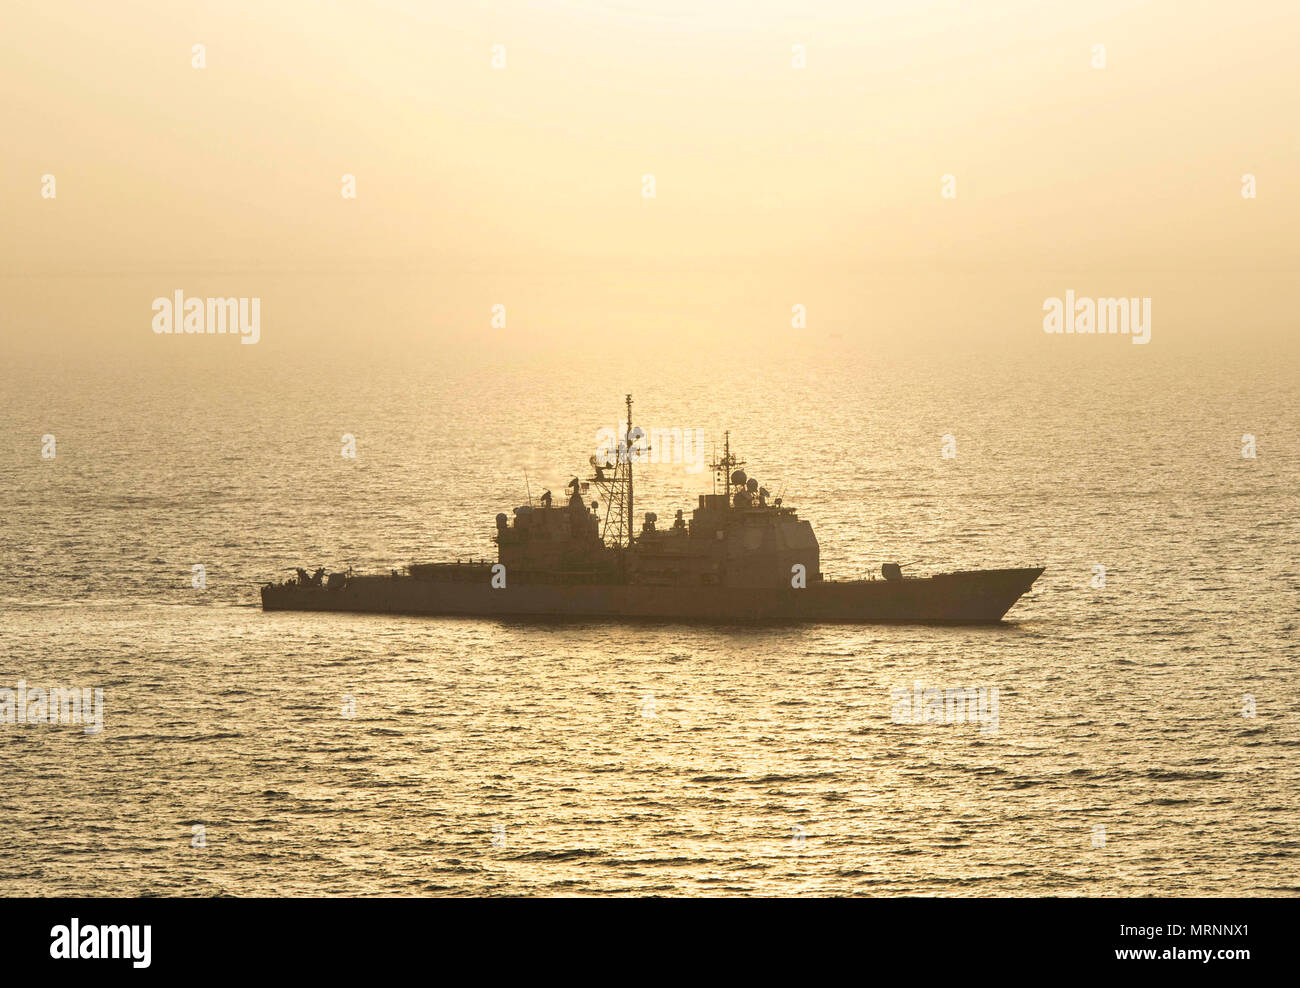 ARABIAN GULF (June 18, 2017) The guided-missile cruiser USS Vella Gulf (CG 72) steams through the Arabian Gulf during Exercise Spartan Kopis 17, June 18.  Exercise Spartan Kopis is a Task Force (TF) 55-led exercise between the U.S. Navy and U.S. Coast Guard in order to increase tactical proficiency, broaden levels of cooperation, enhance mutual capability and support long-term security and stability in the region. Vella Gulf is deployed to the U.S. 5th Fleet area of operations to reassure allies and partners, and preserve the freedom of navigation and the free flow of commerce in the region.   Stock Photo